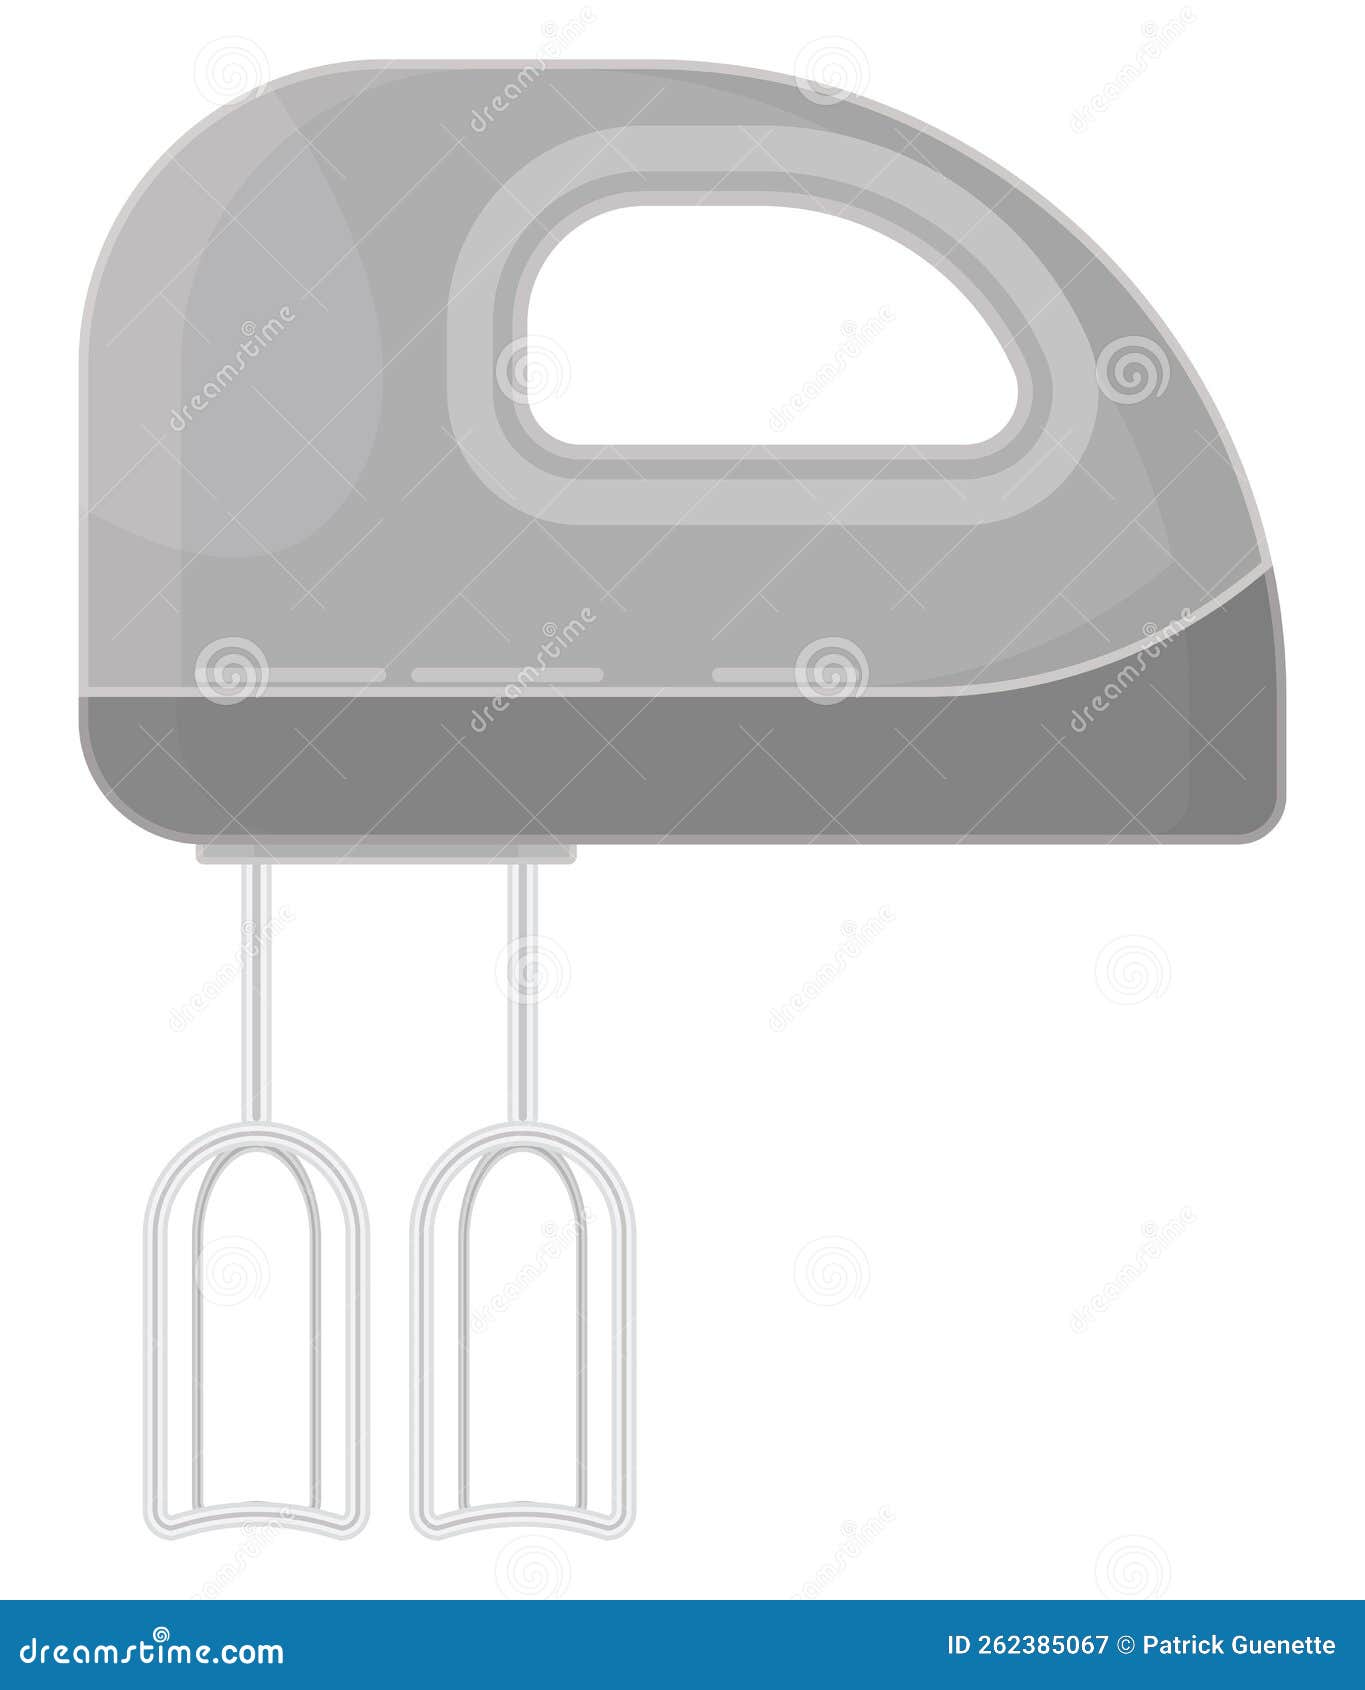 Whipping machine, icon stock vector. Illustration of mixing - 262385067